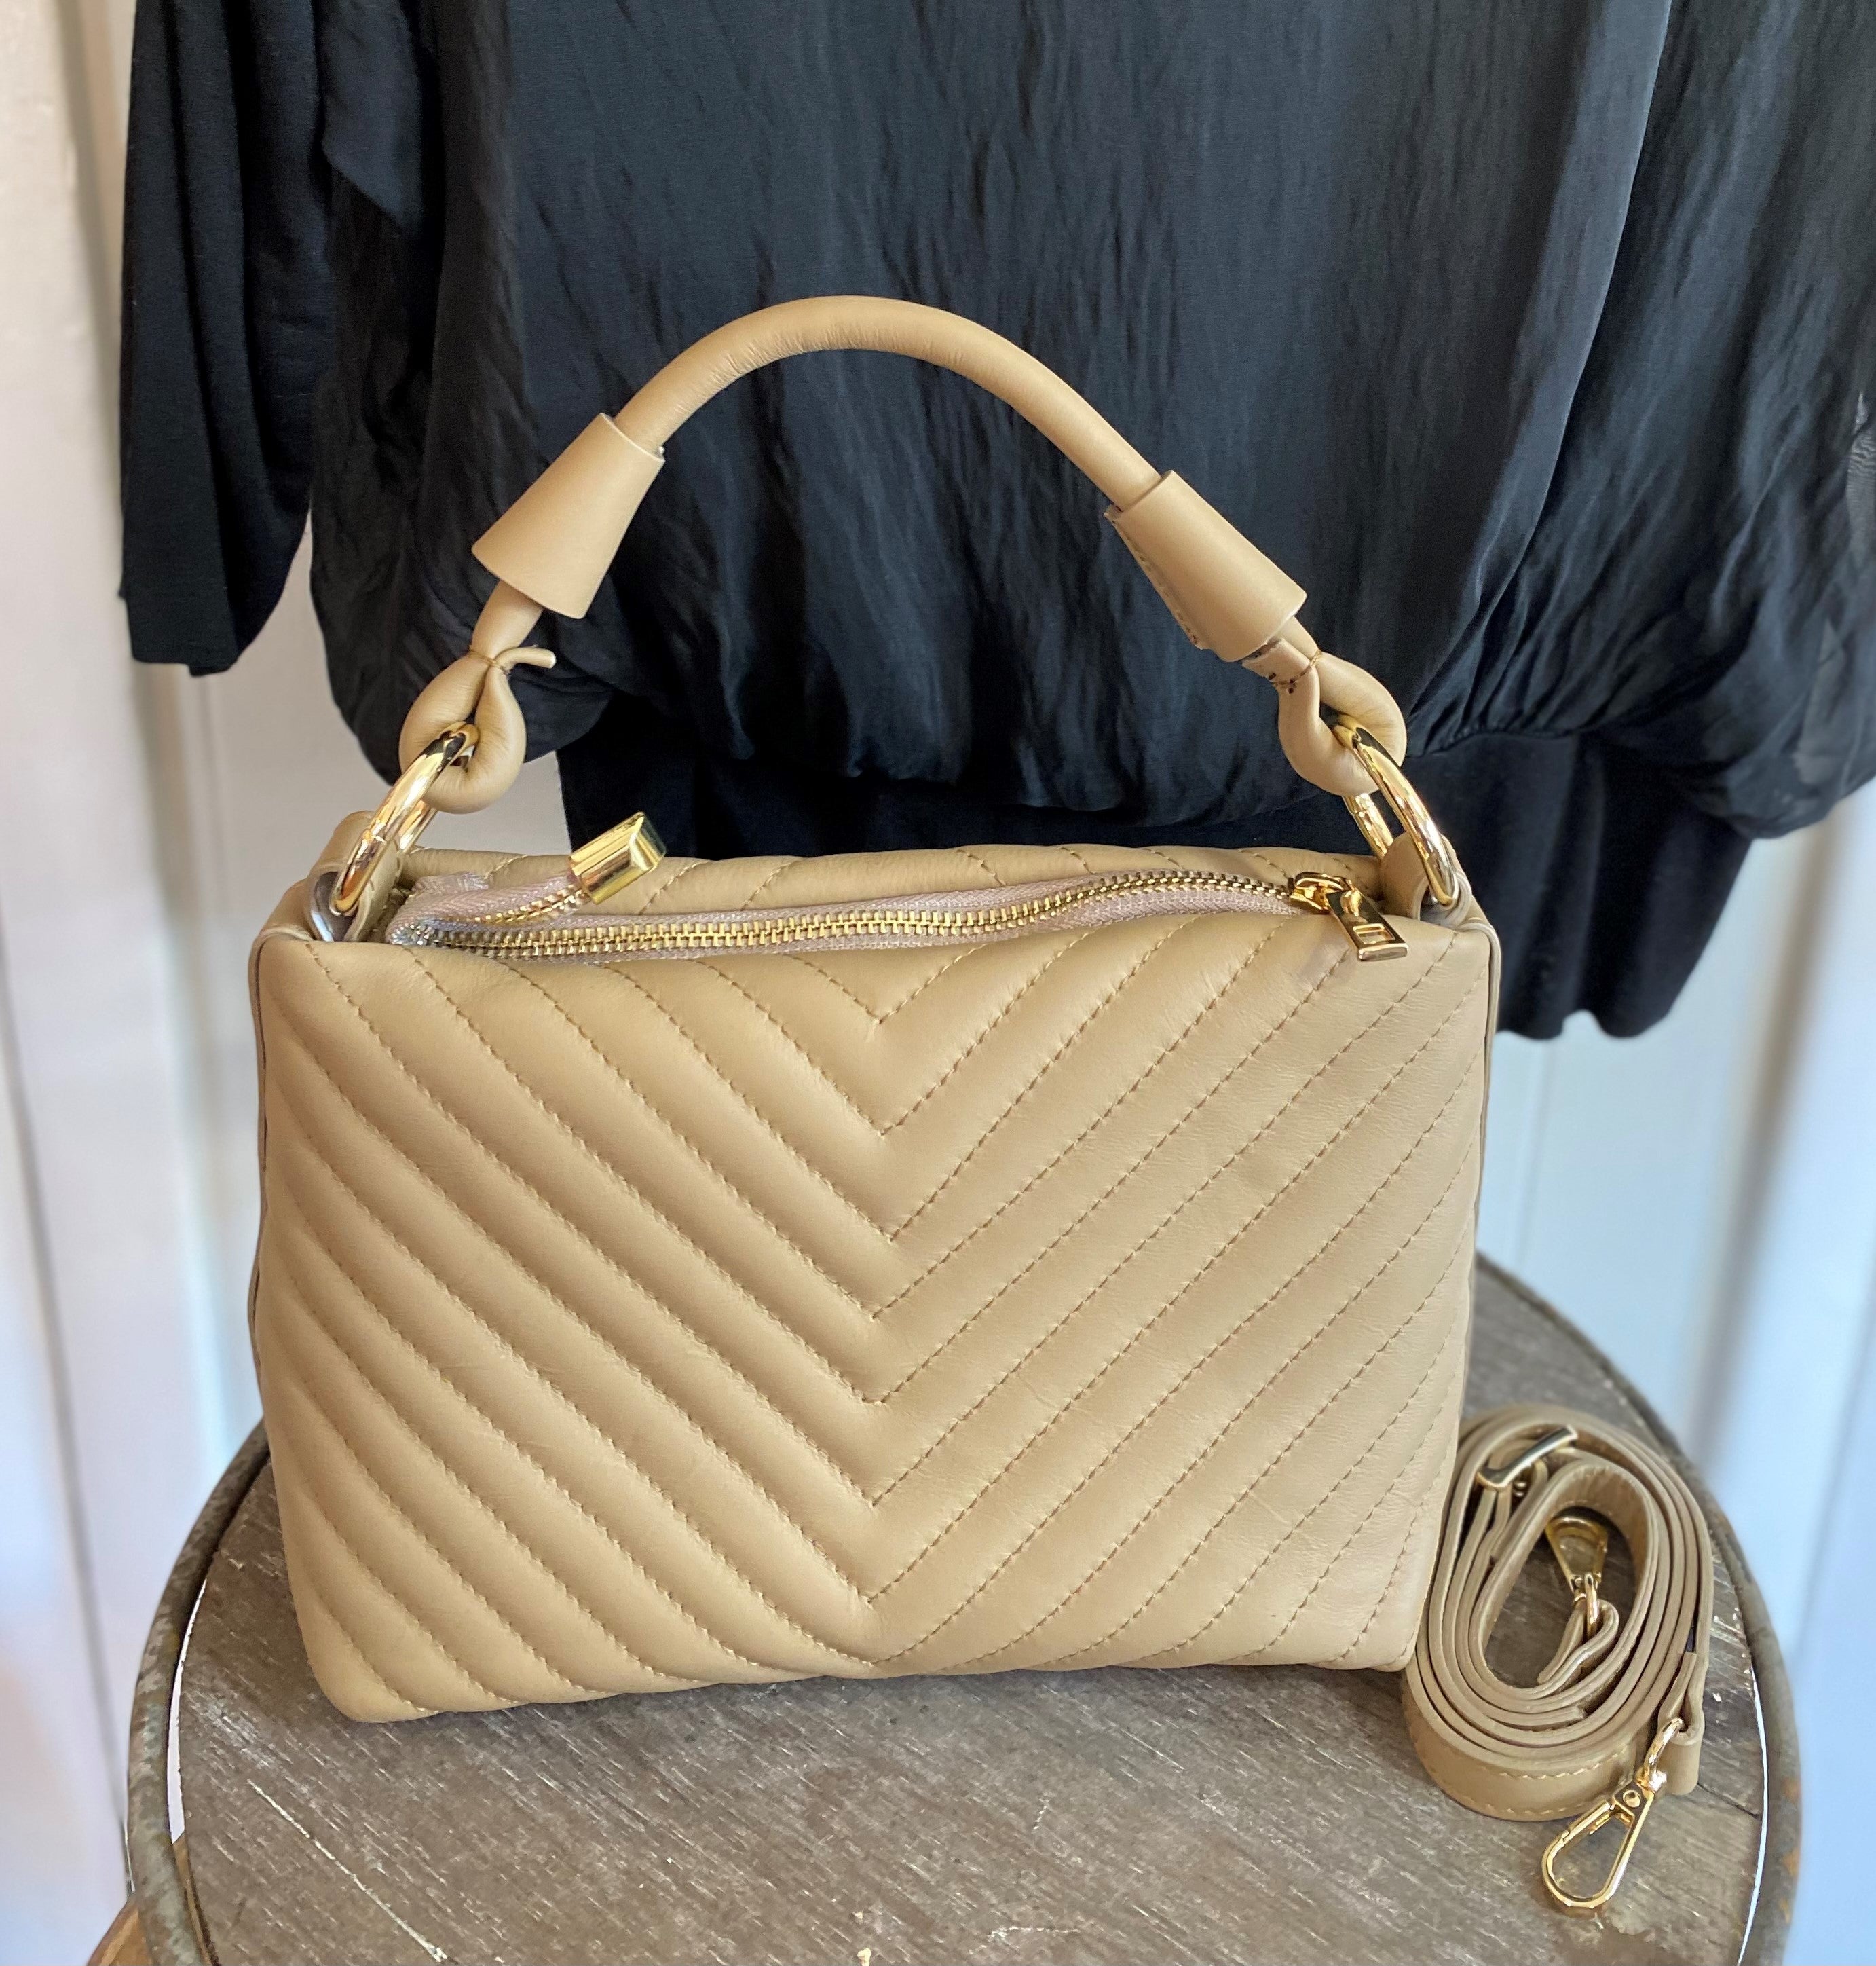 This beautiful Italian leather bag is detailed with timeless quilted stitching. It has luxe metal hardware and a removable shoulder strap.  Details: Supple genuine Italian quilted stitched leather. Top zipper. Attached inside pocket. Approximately 11" x 7.25" x 4"